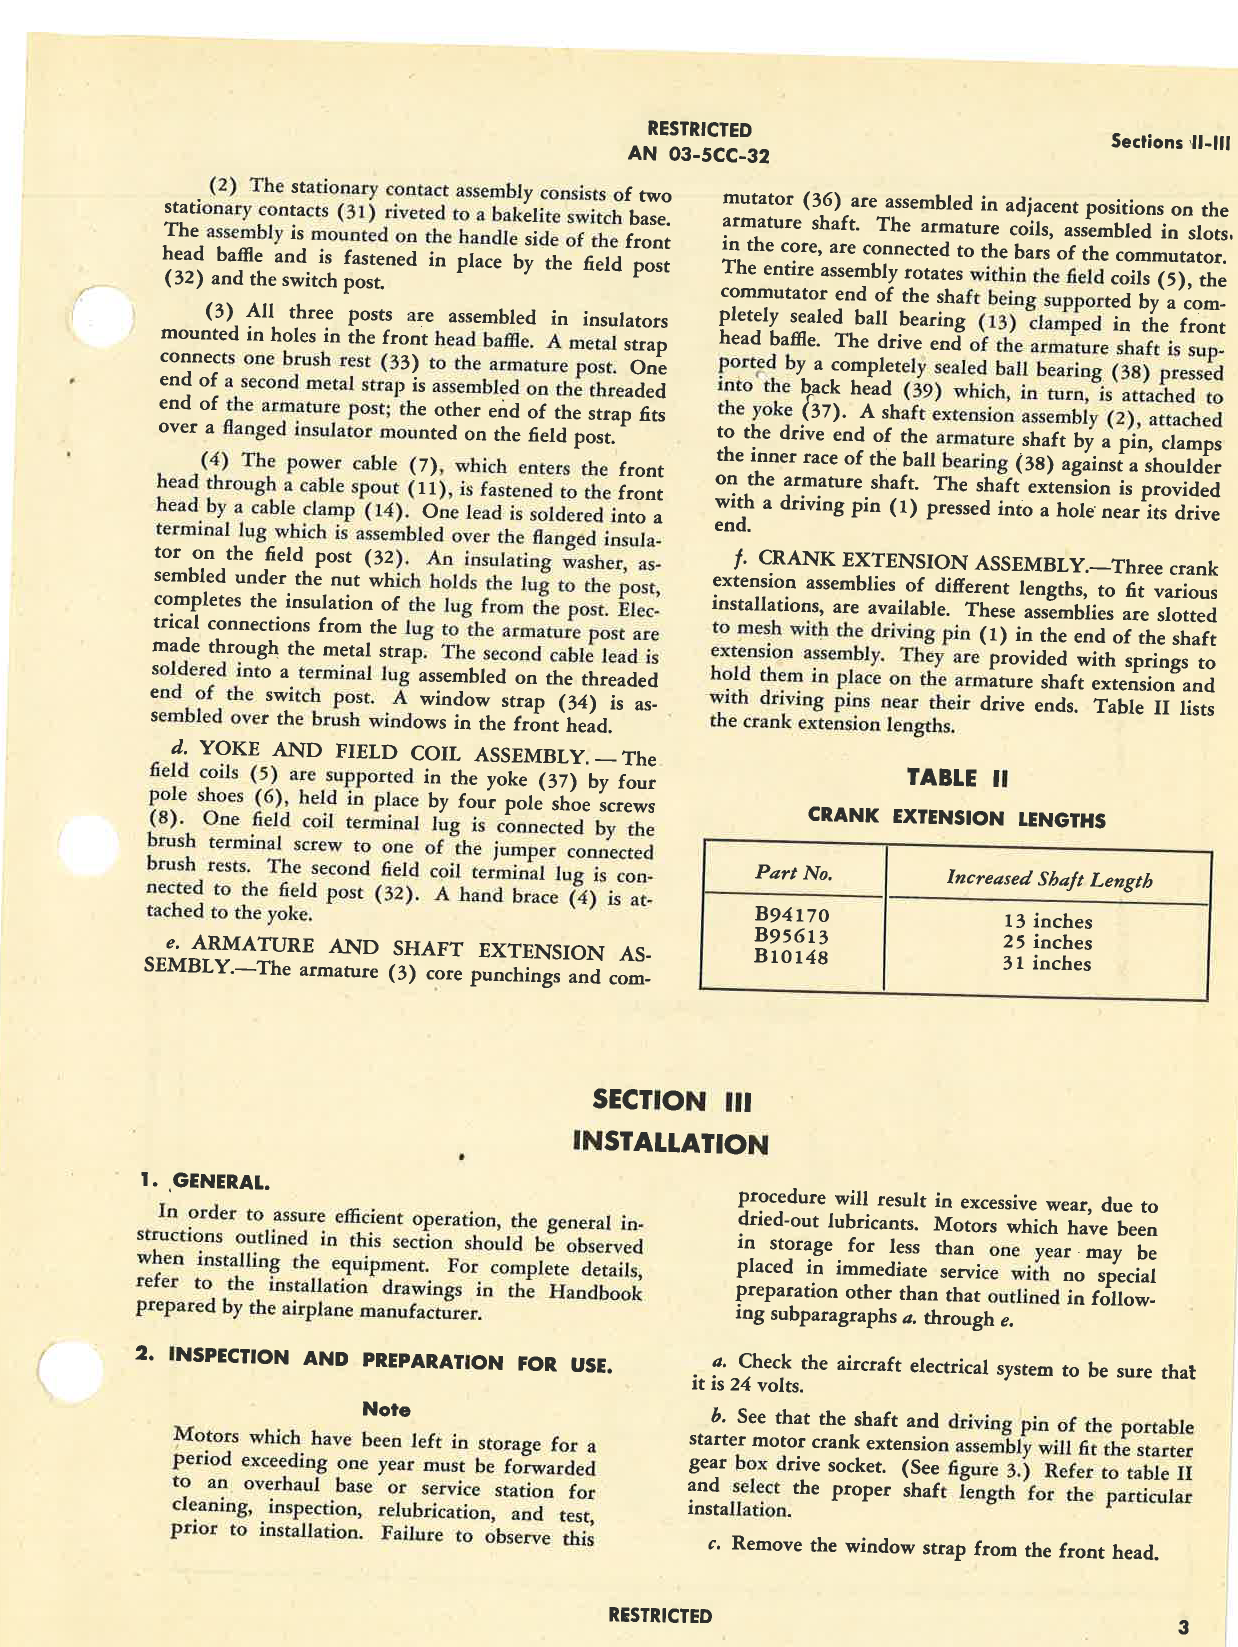 Sample page 7 from AirCorps Library document: Handbook of Instructions with Parts Catalog for Portable Starter Motor Type 892-6-B